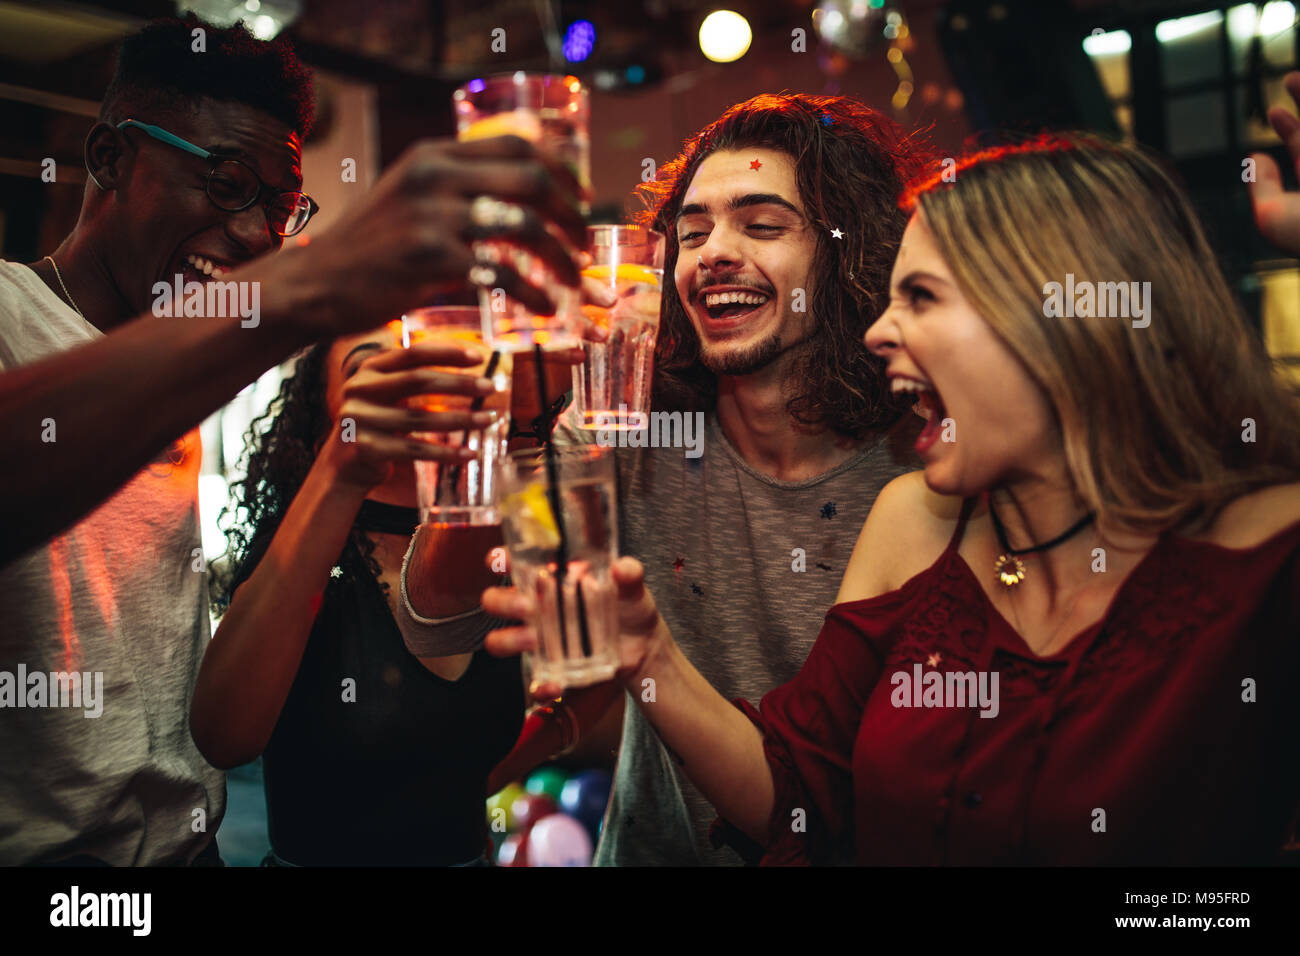 Young men and women celebrating a party, drinking and dancing. Group of friend toasting drinks and having fun at the nightclub. Stock Photo